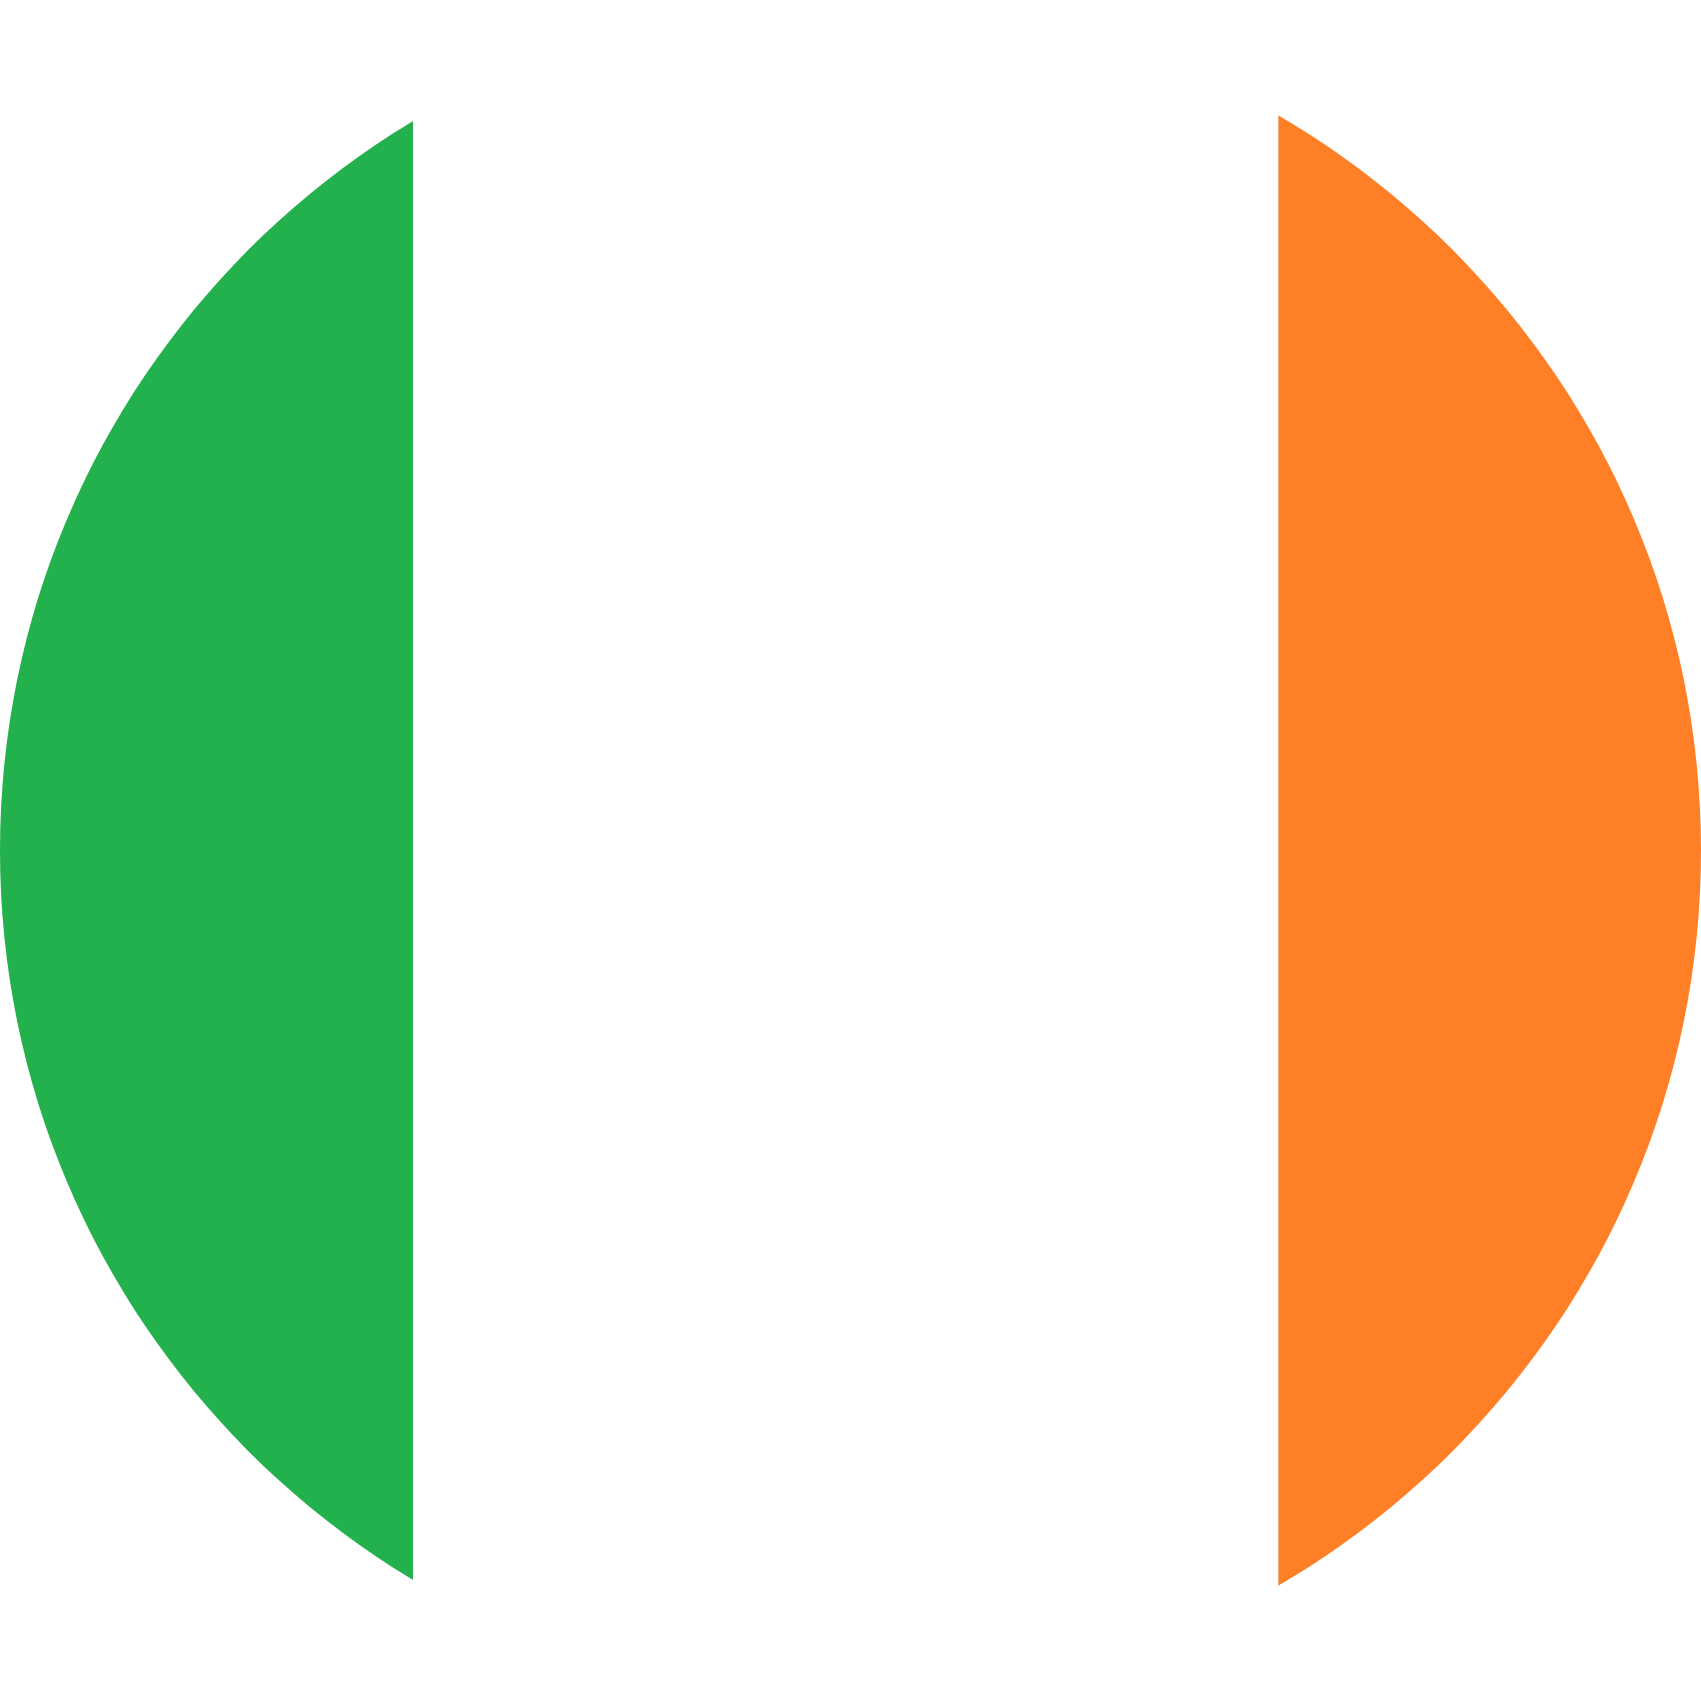 Irelad flag in a circle